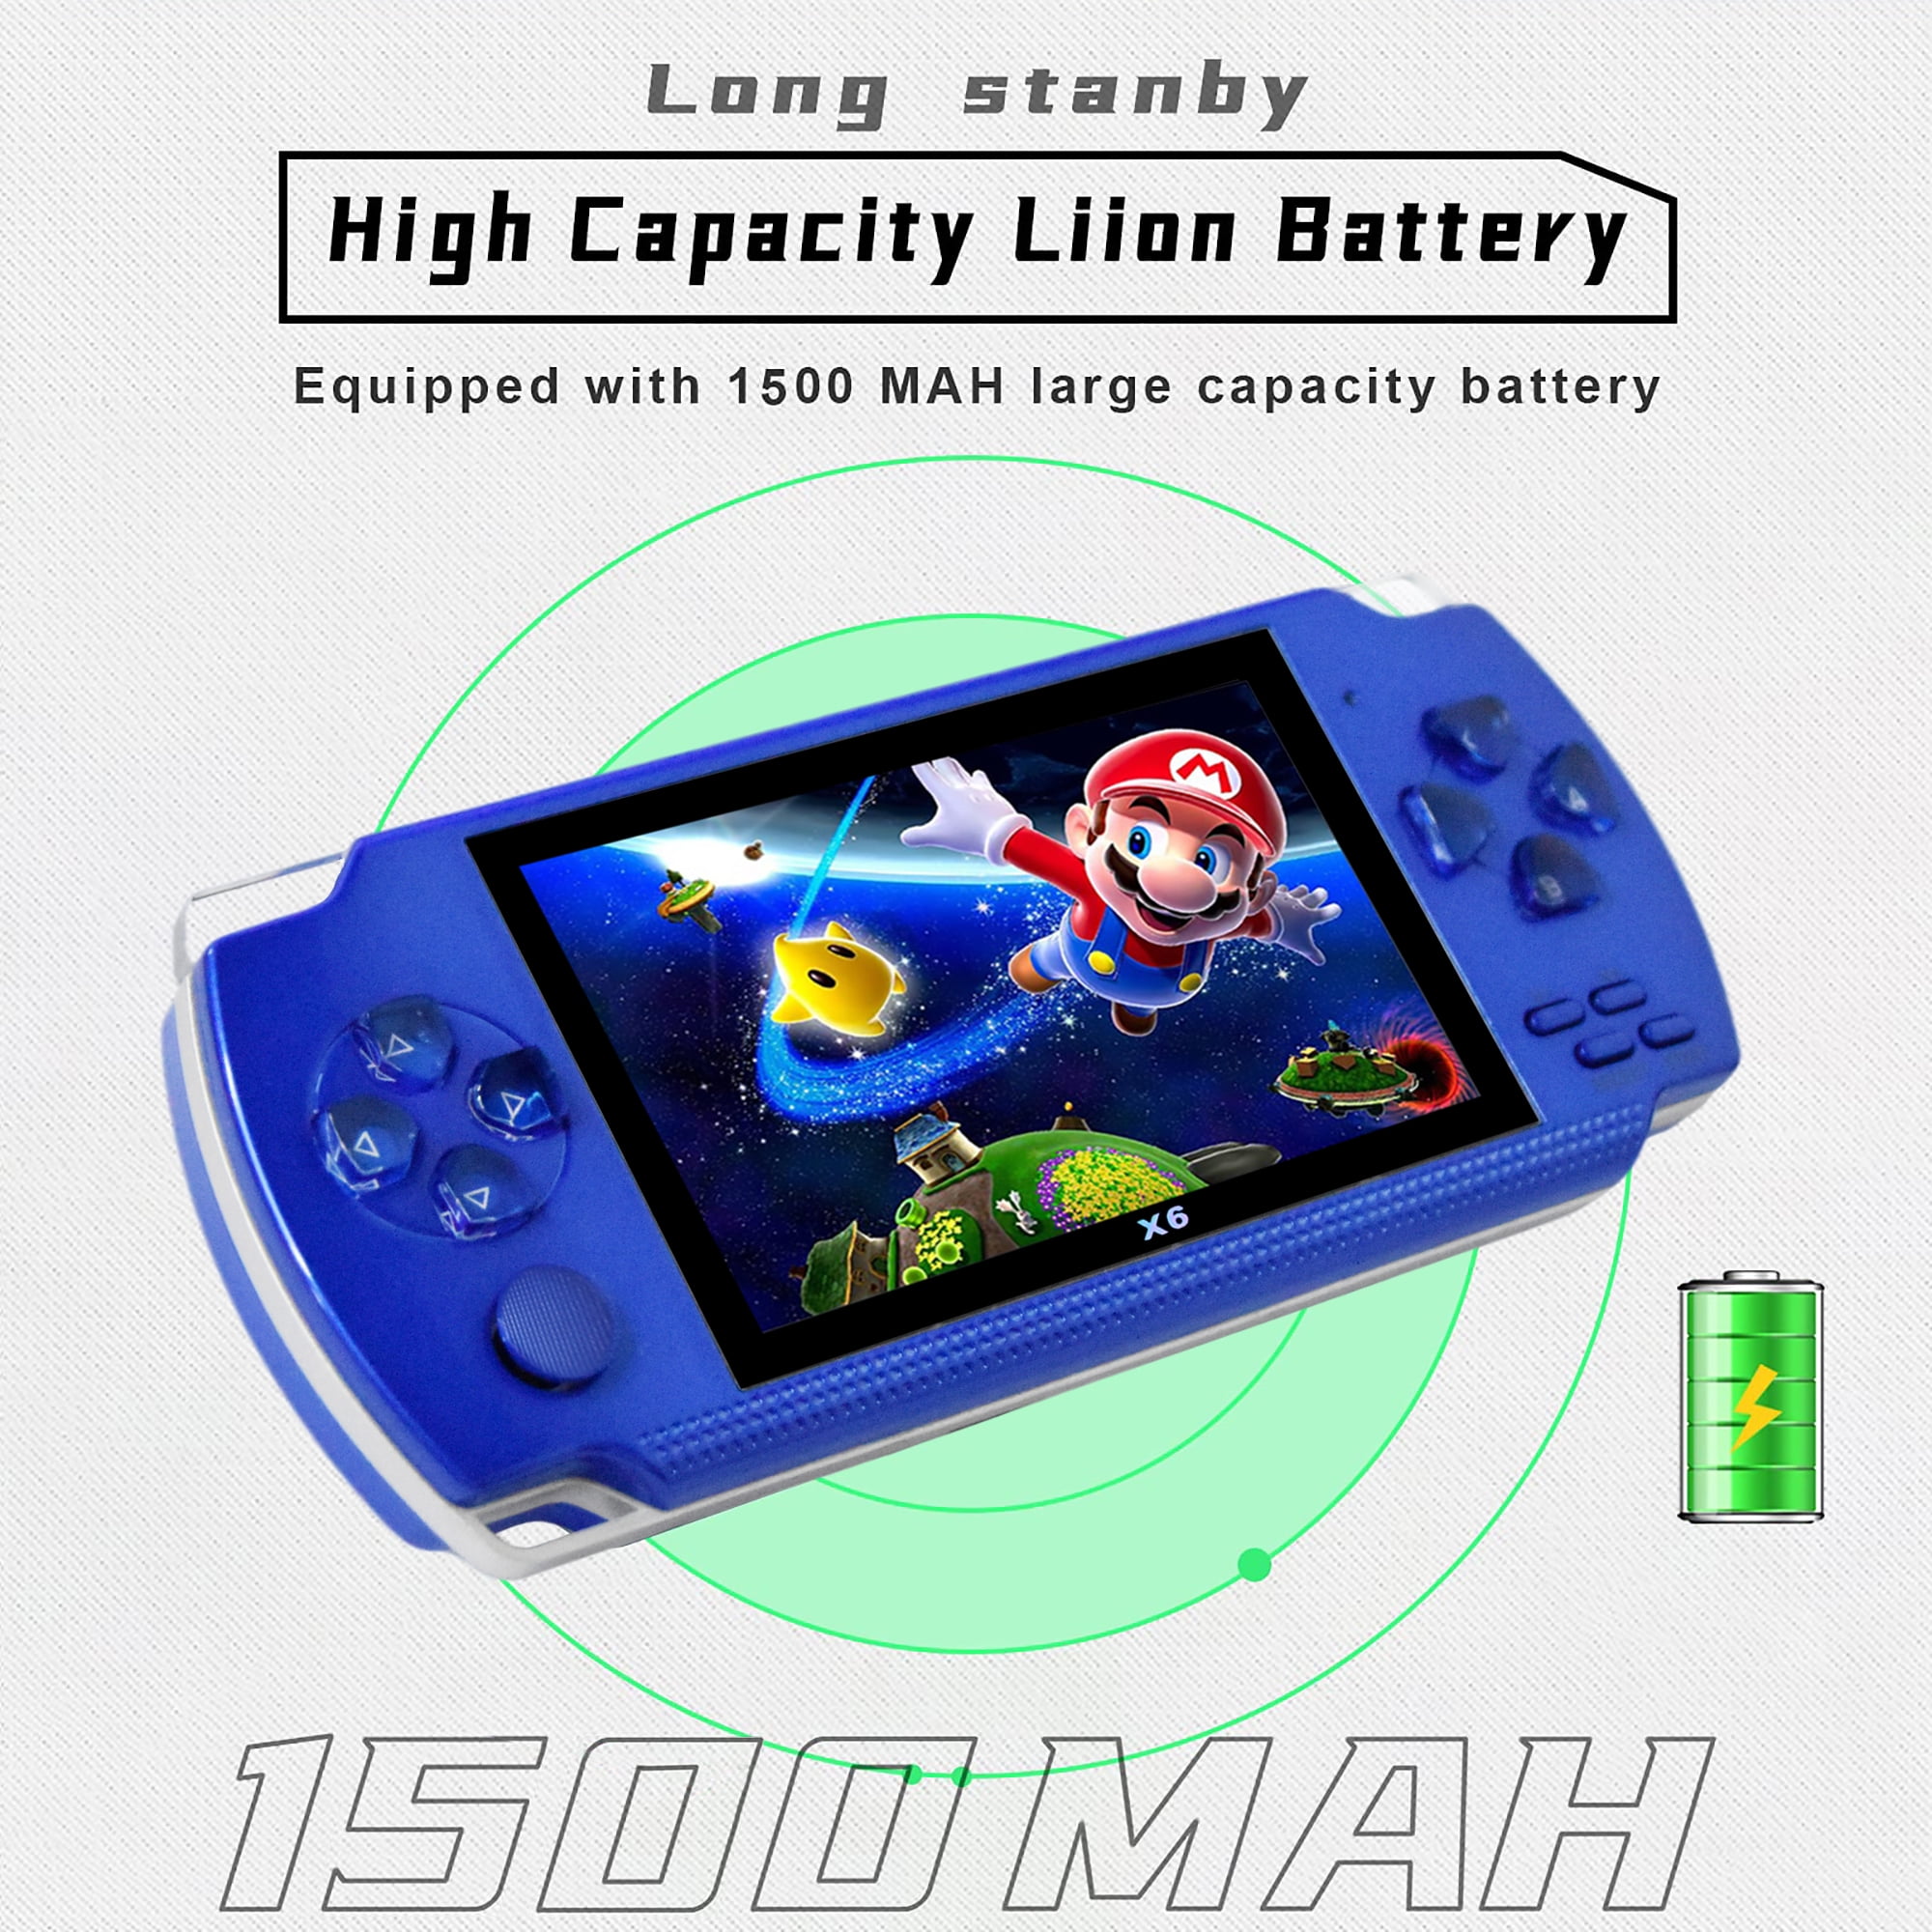 The $50 GameMax A390 Android Handheld - First Impressions: It runs (some)  N64 & PSP! 